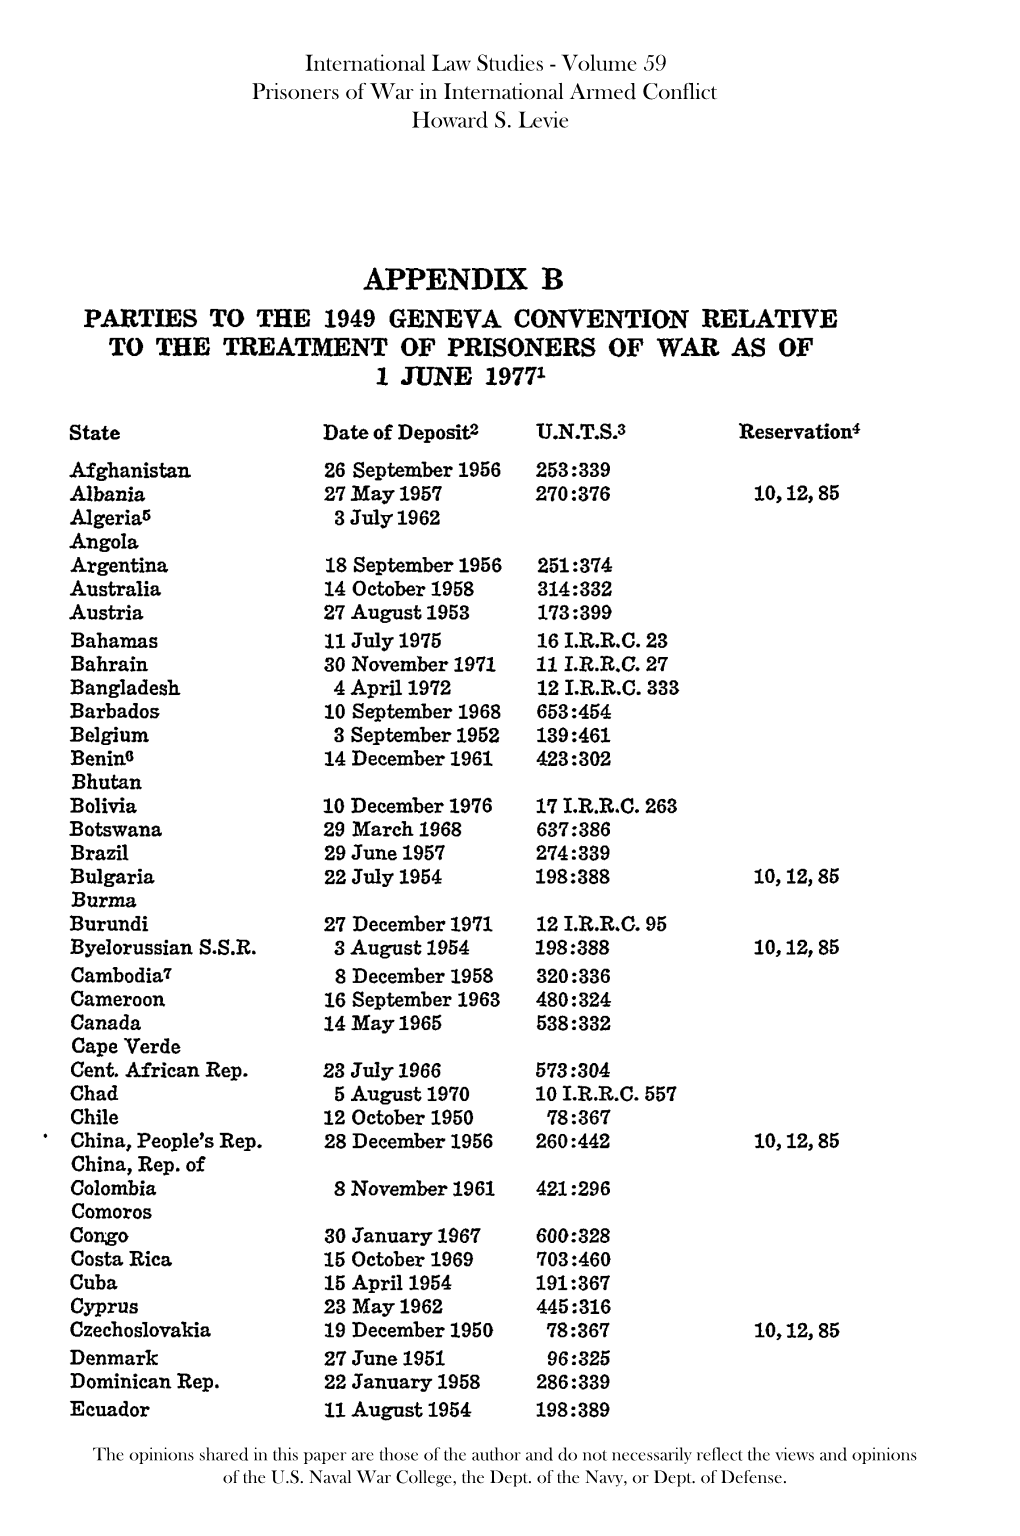 Appendix B Parties to the 1949 Geneva Convention Relative to the Treatment of Prisoners of War As of 1 June 19771